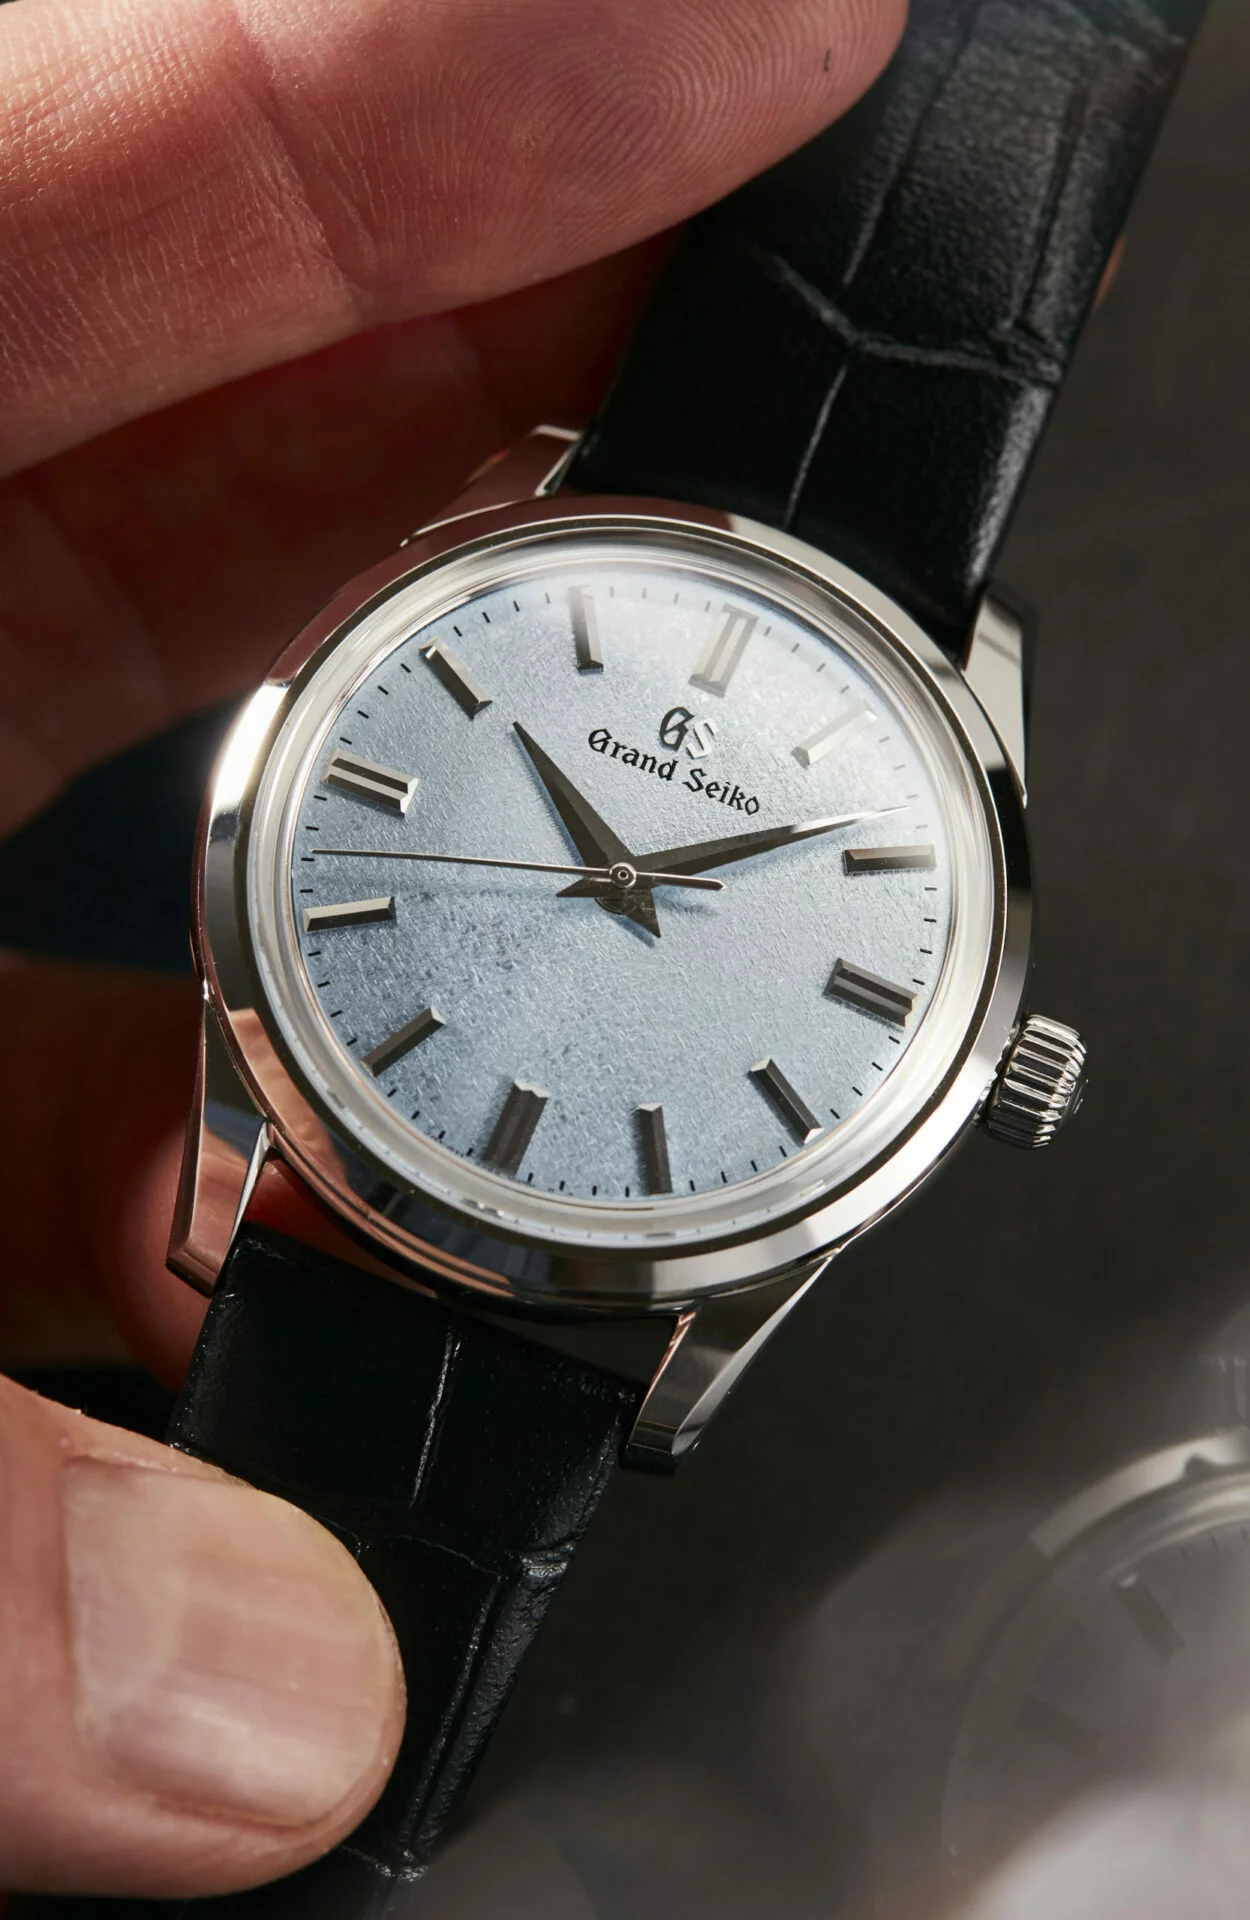 VIDEO: The new Grand Seiko SBGW283, SBGW285, and SBGE277